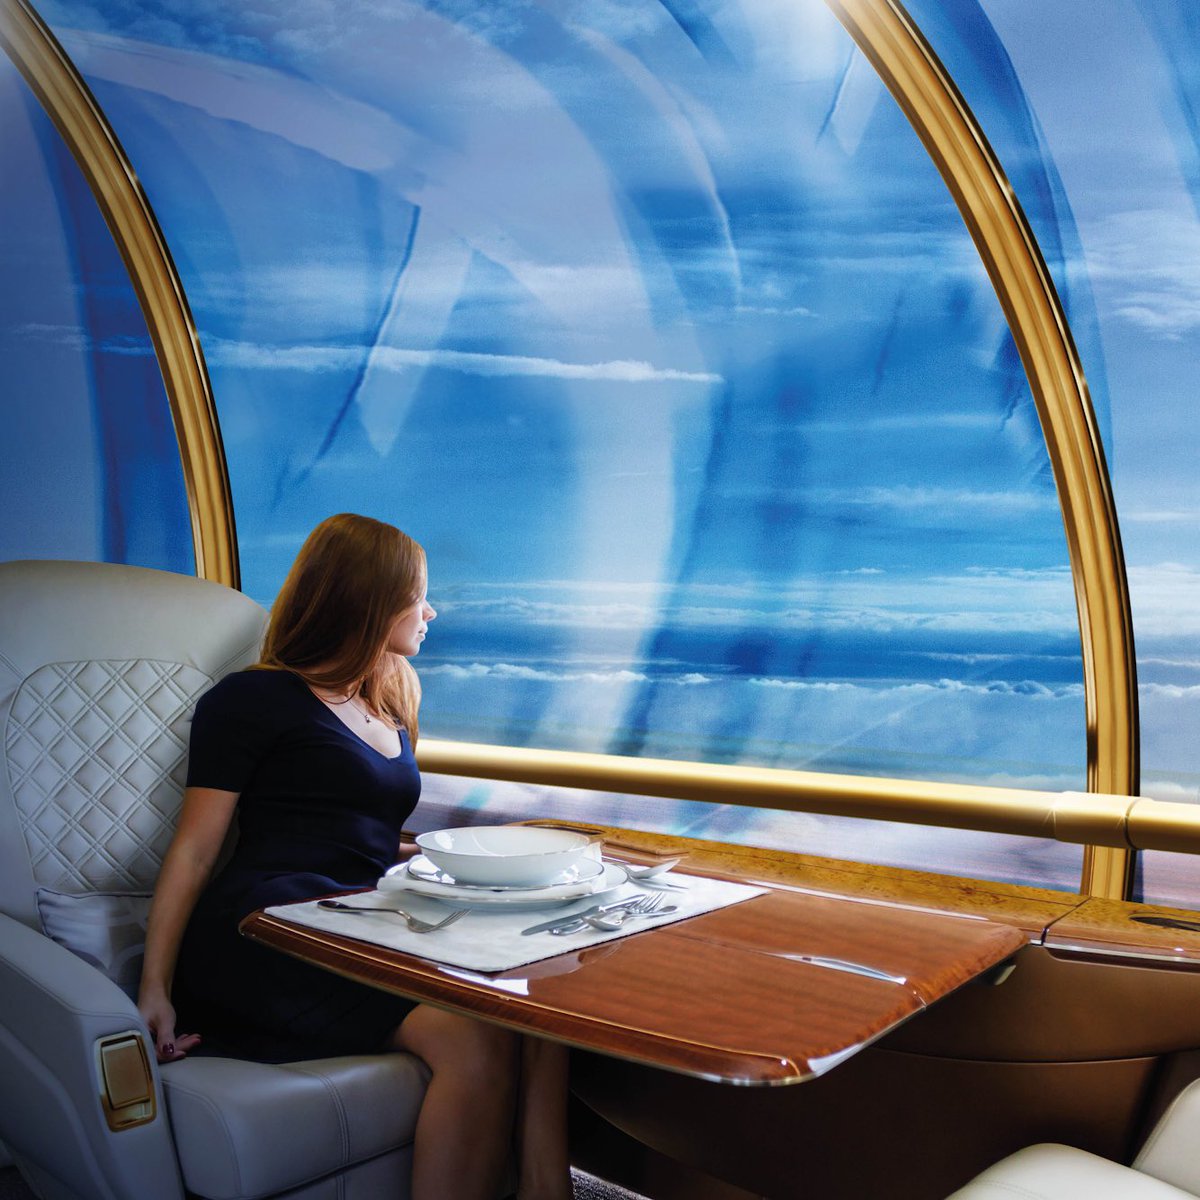 Emirates reveals SkyLounge, the most exclusive Onboard Lounge to be introduced on its Boeing 777X fleet from 2020. A completely transparent lounge with unmatched aerial views and unparalleled luxury, Emirates SkyLounge promises window views like no other.